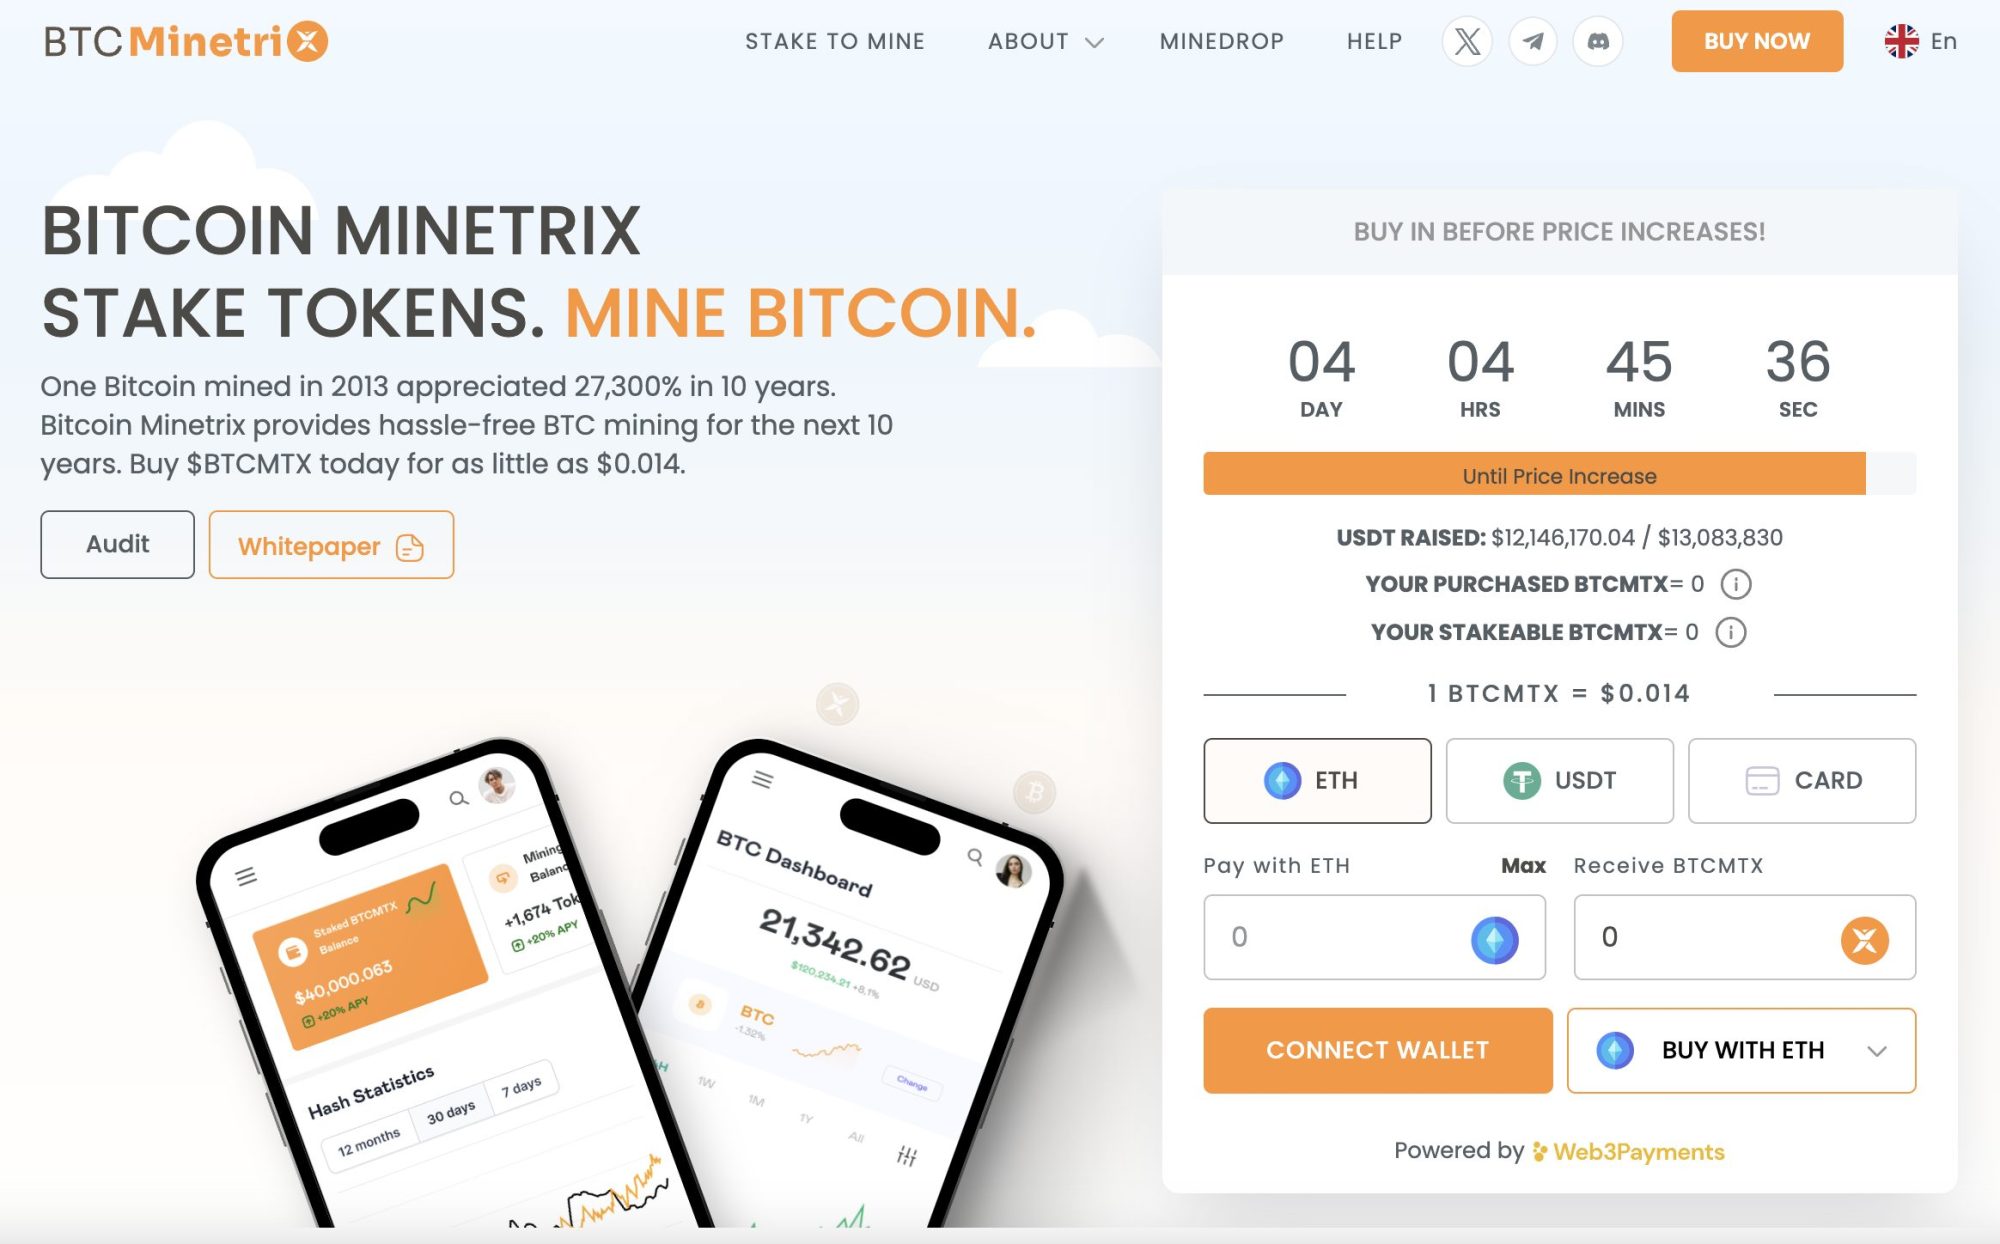 A screenshot of the presale page on the bitcoin minetrix website